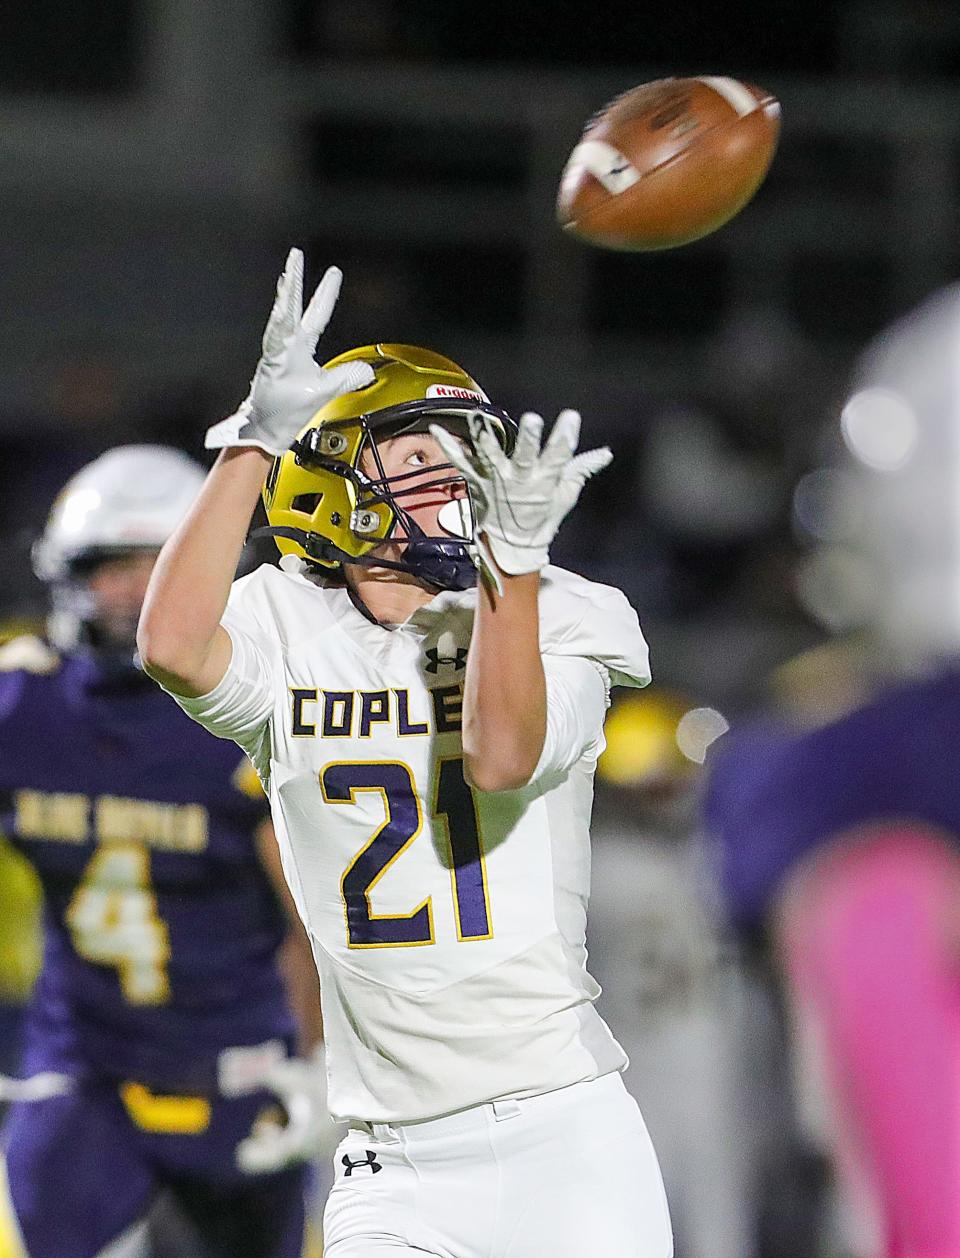 Copley's Andrew McKnight hauls in a second quarter touchdown pass against Tallmadge on Friday, Oct. 14, 2022 in Tallmadge.